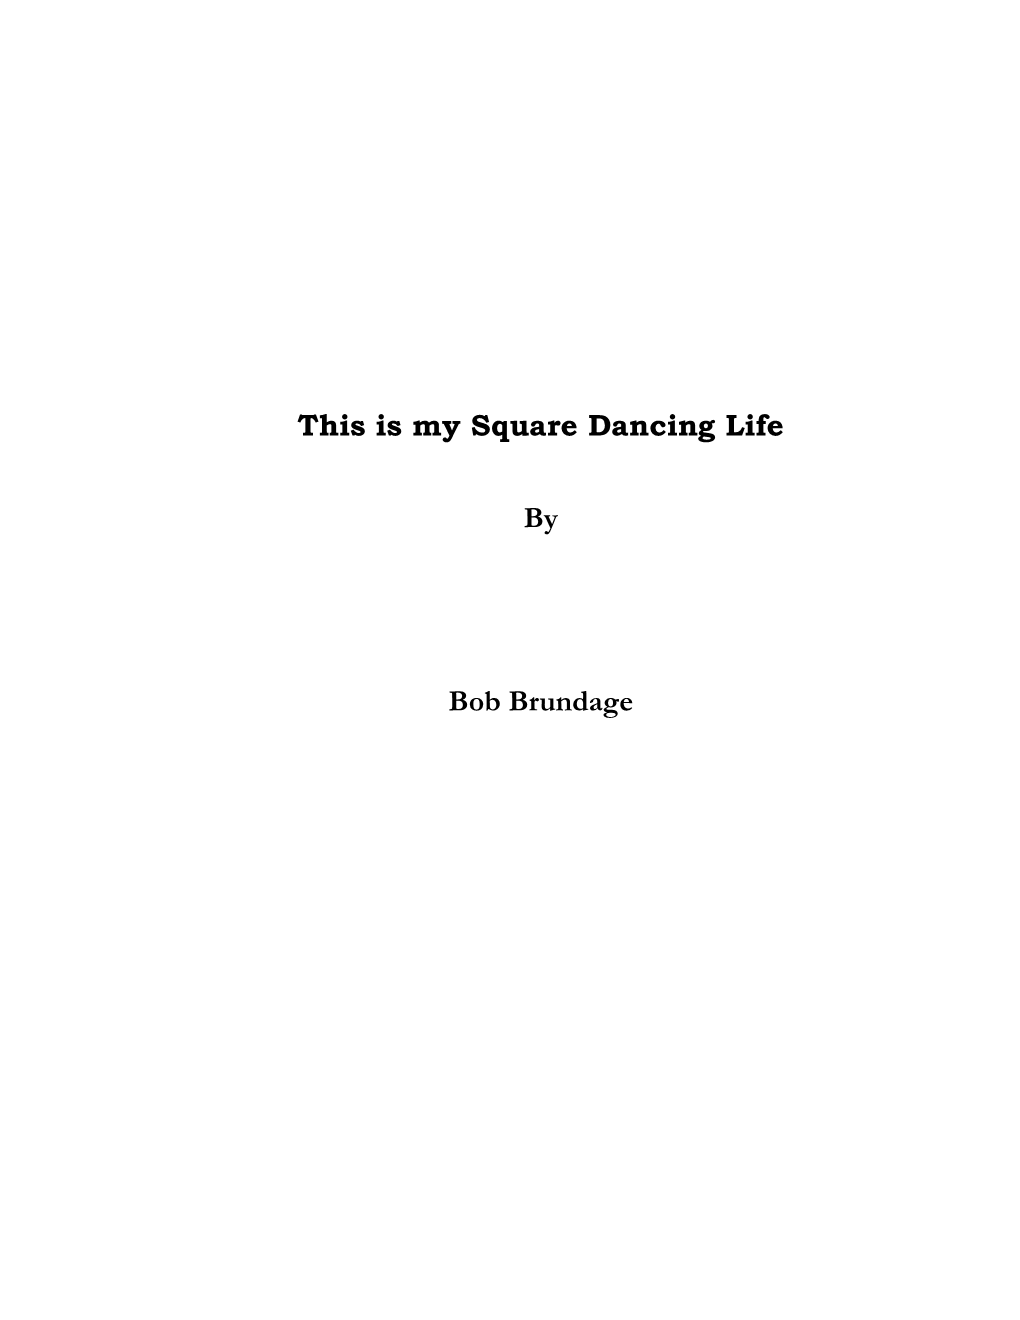 This Is My Square Dancing Life by Bob Brundage